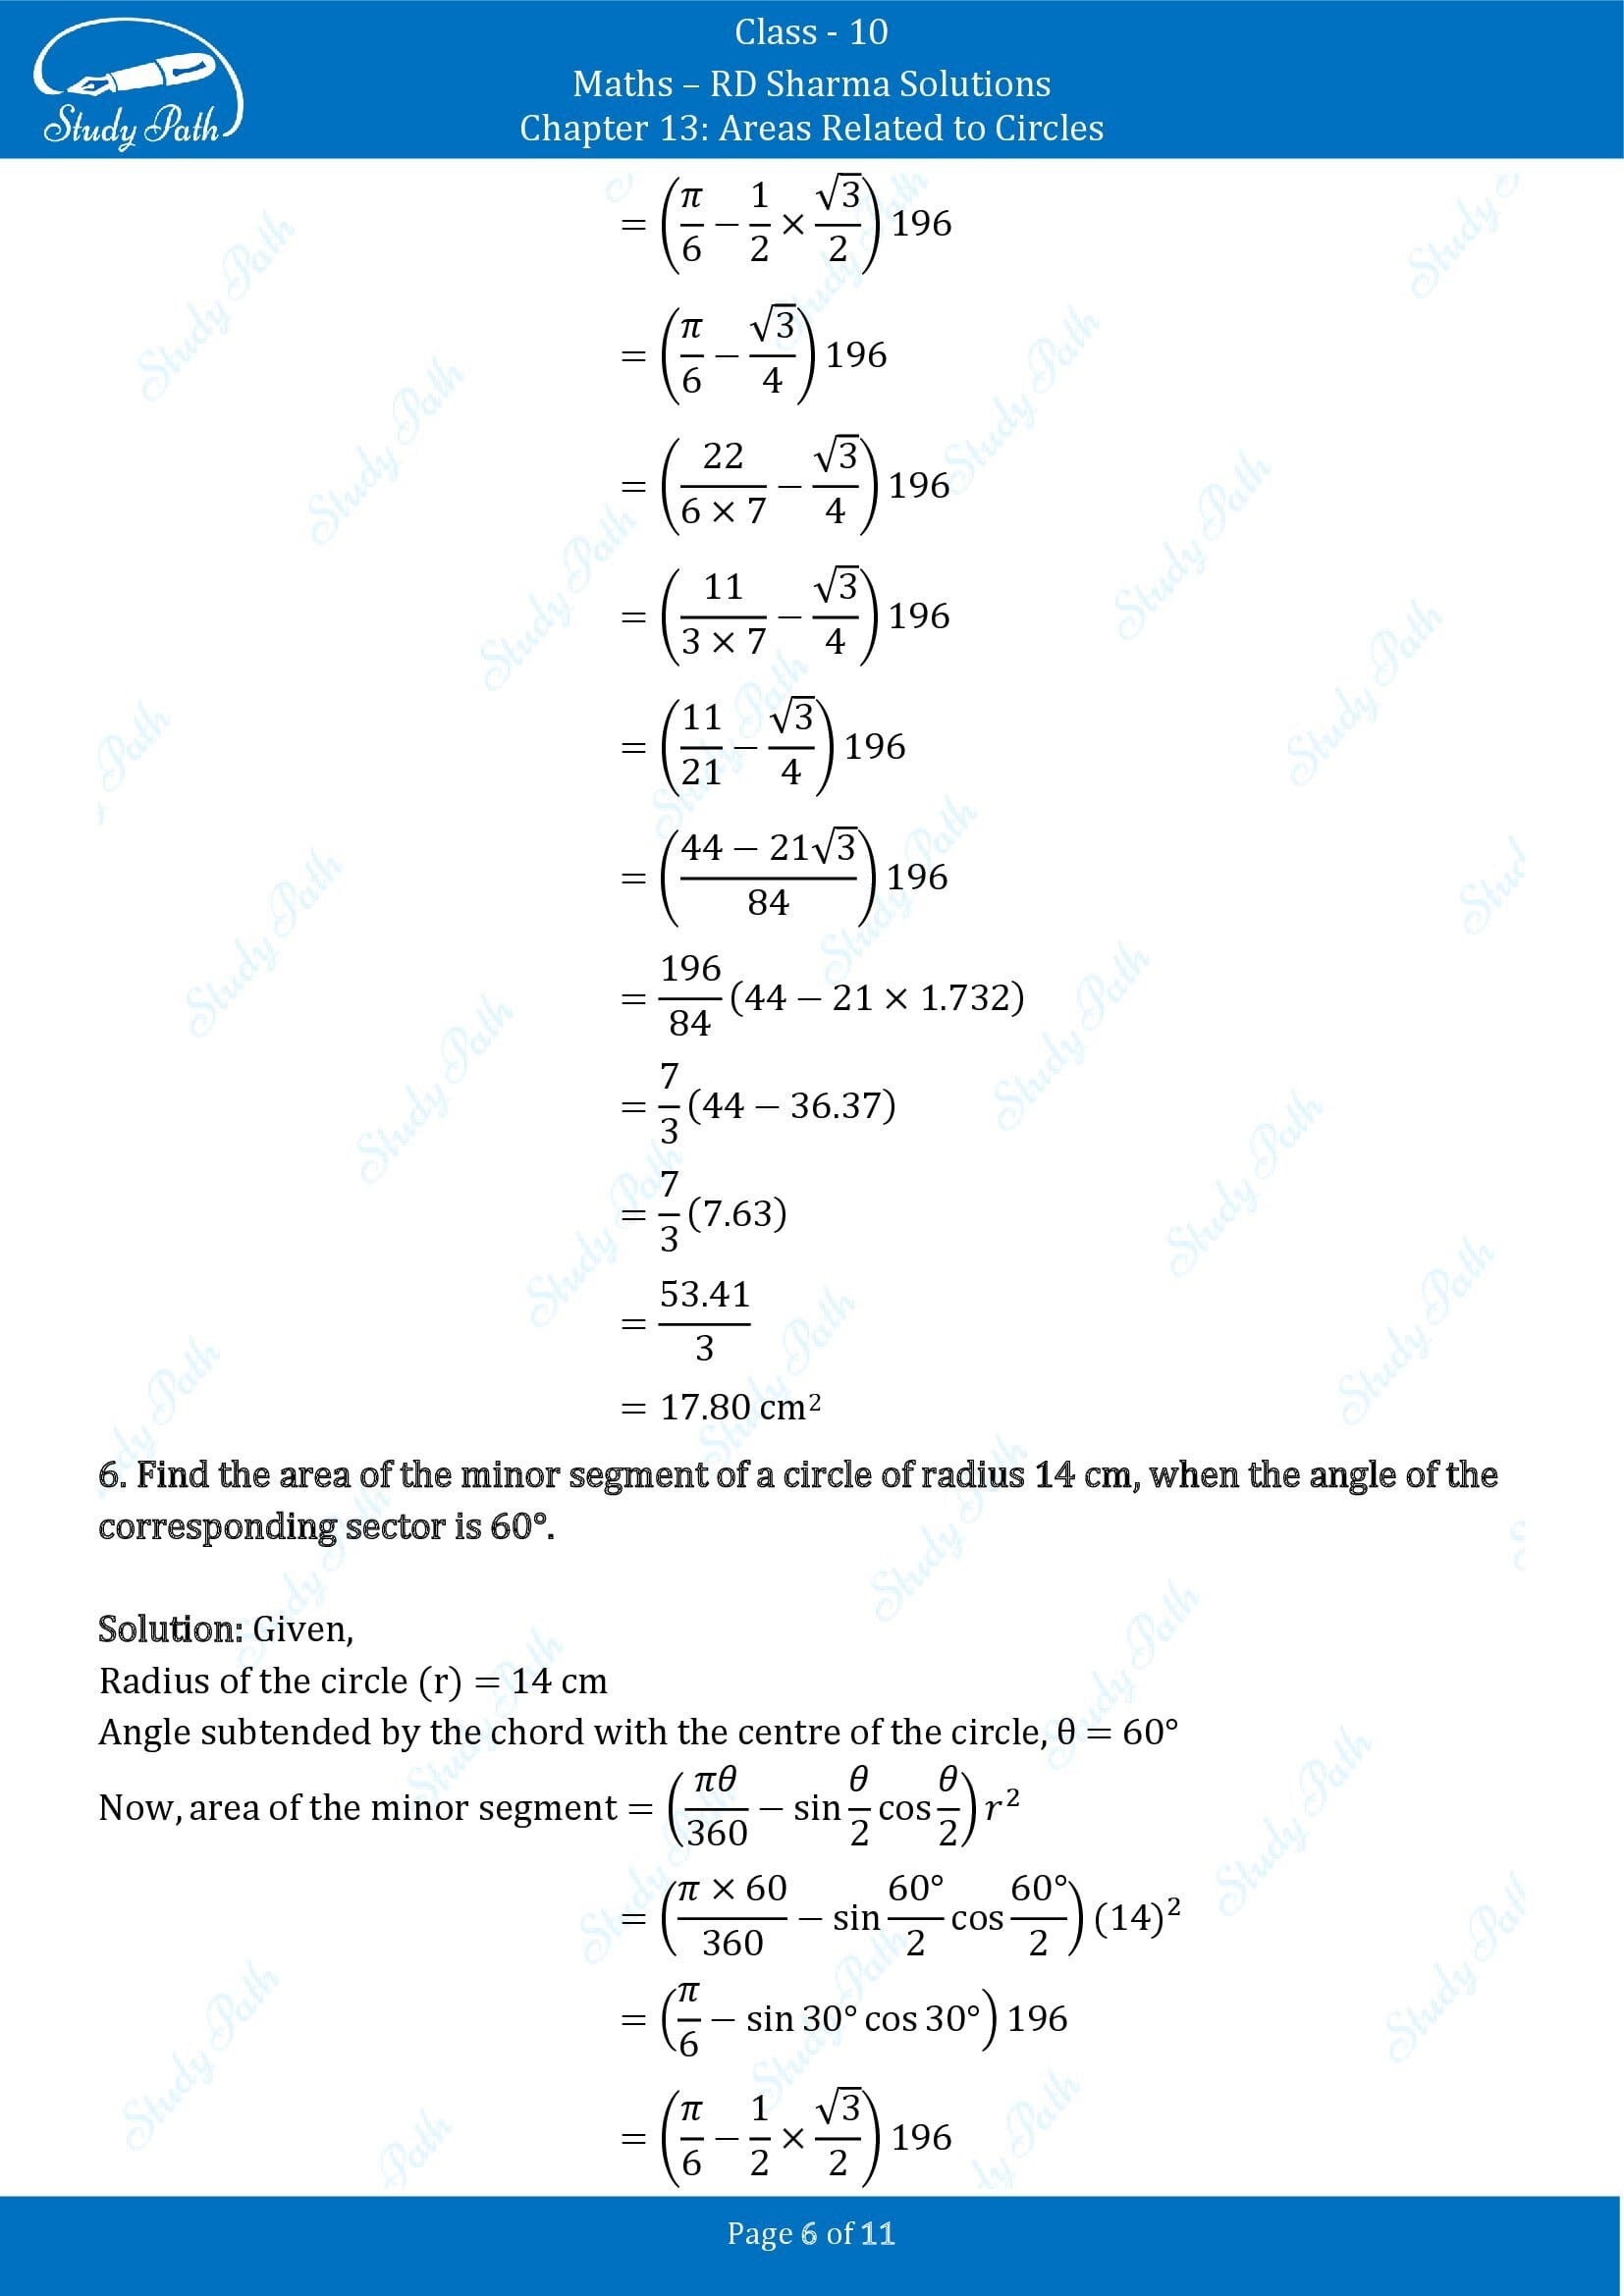 RD Sharma Solutions Class 10 Chapter 13 Areas Related to Circles Exercise 13.3 00006